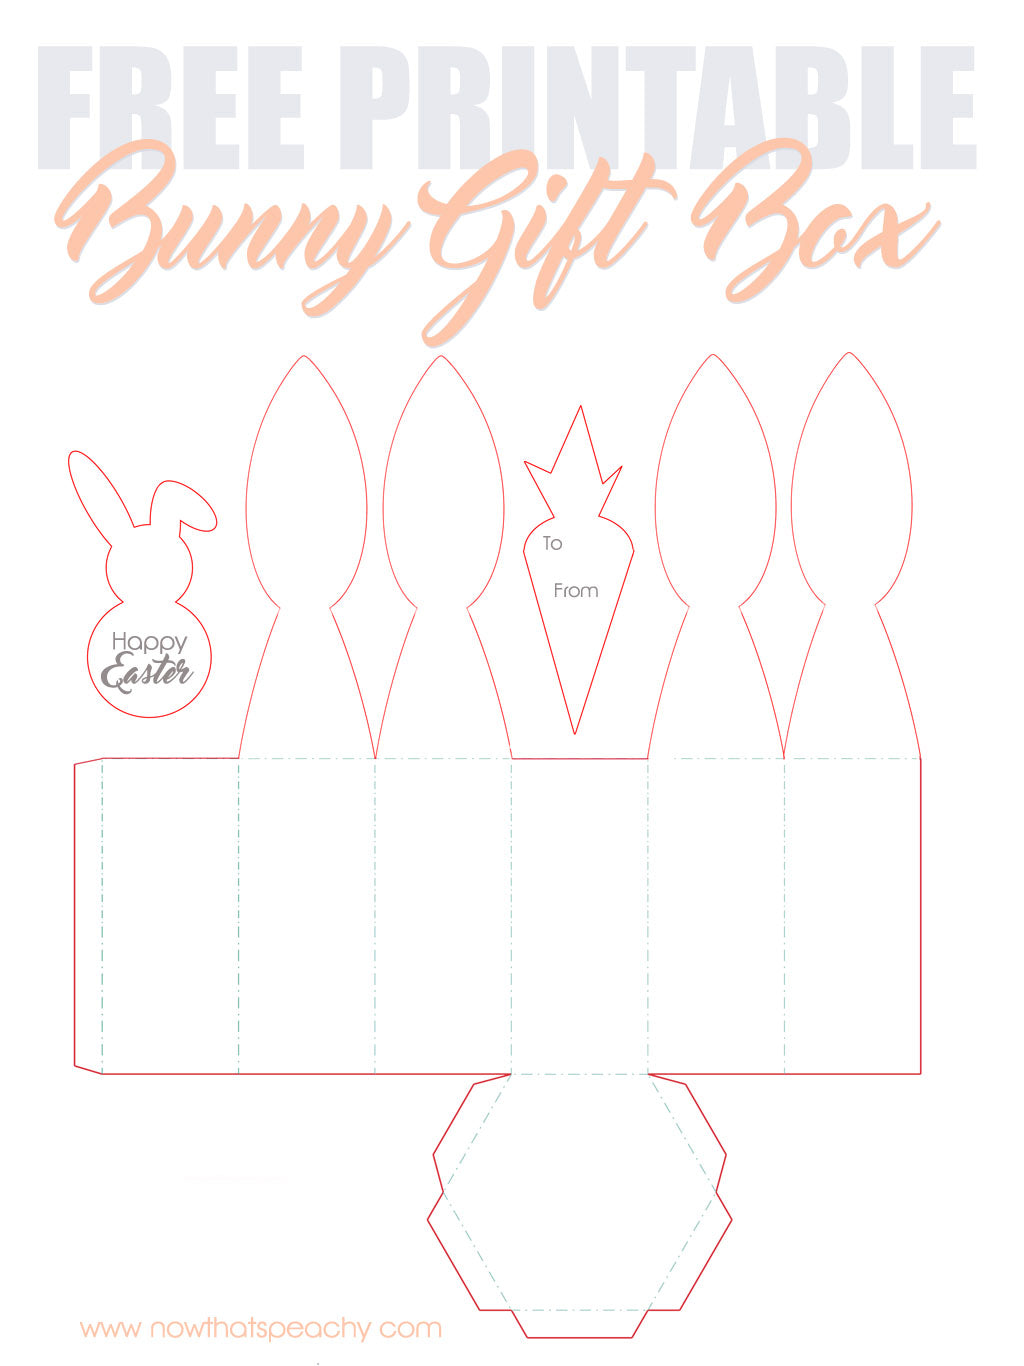 Bunny Ears Favour Box | FREE EASTER Printable